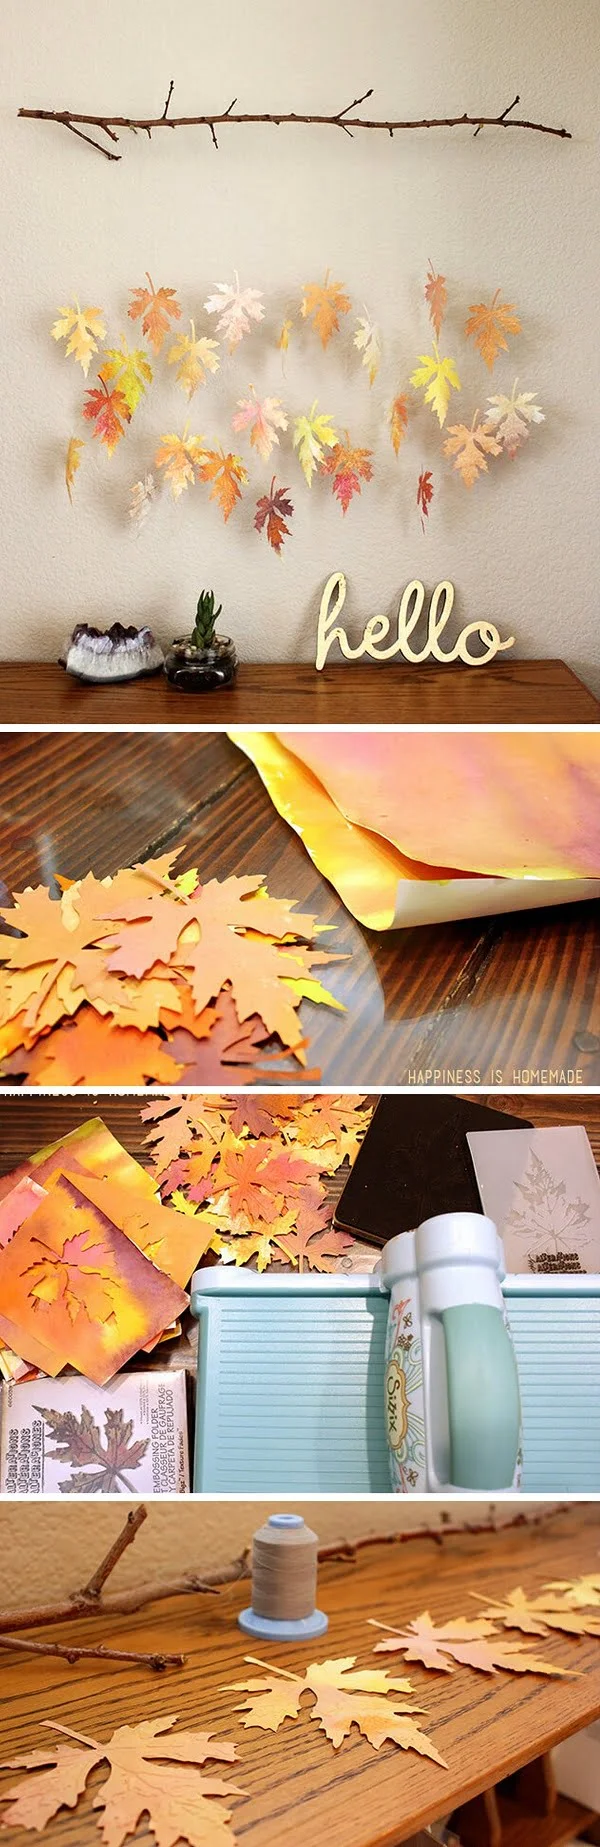 Check out the tutorial how to make a DIY faux fall leaf garland from paper